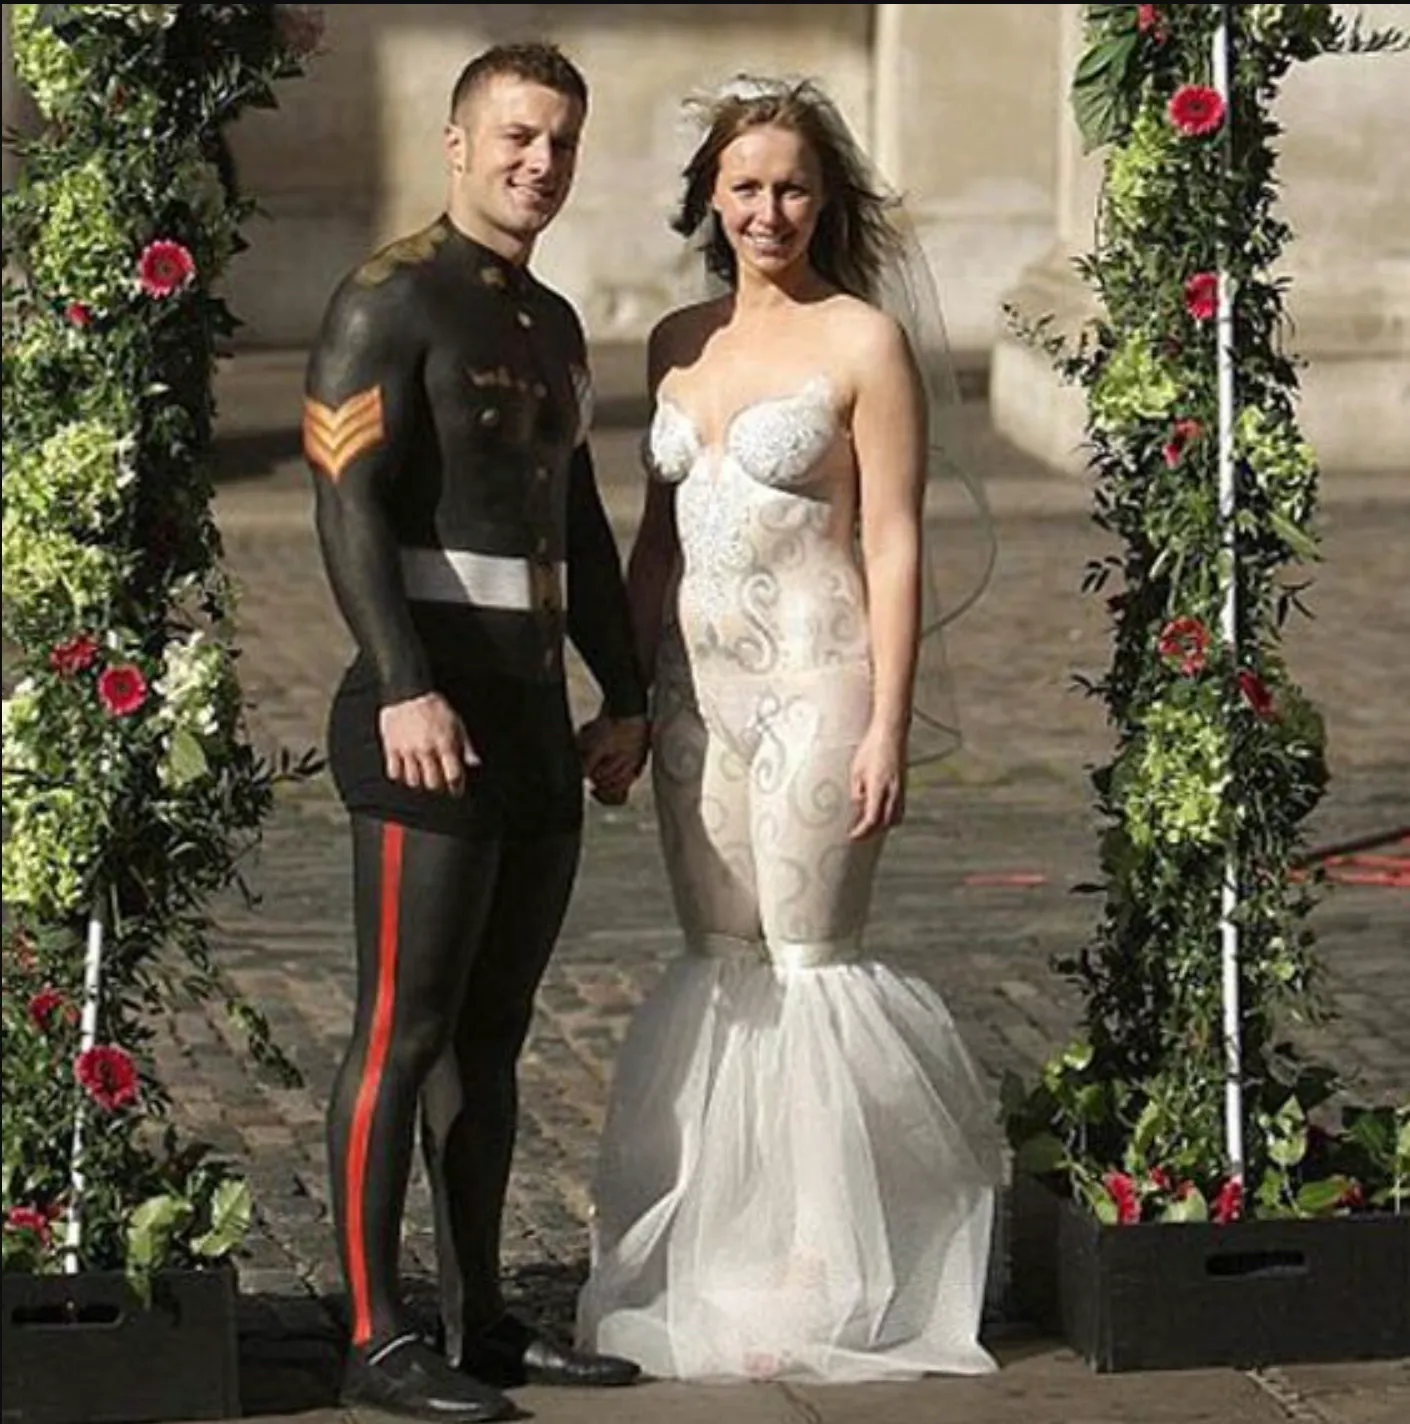 dina el nagar add body paint wedding dresses that hide nothing at all photo